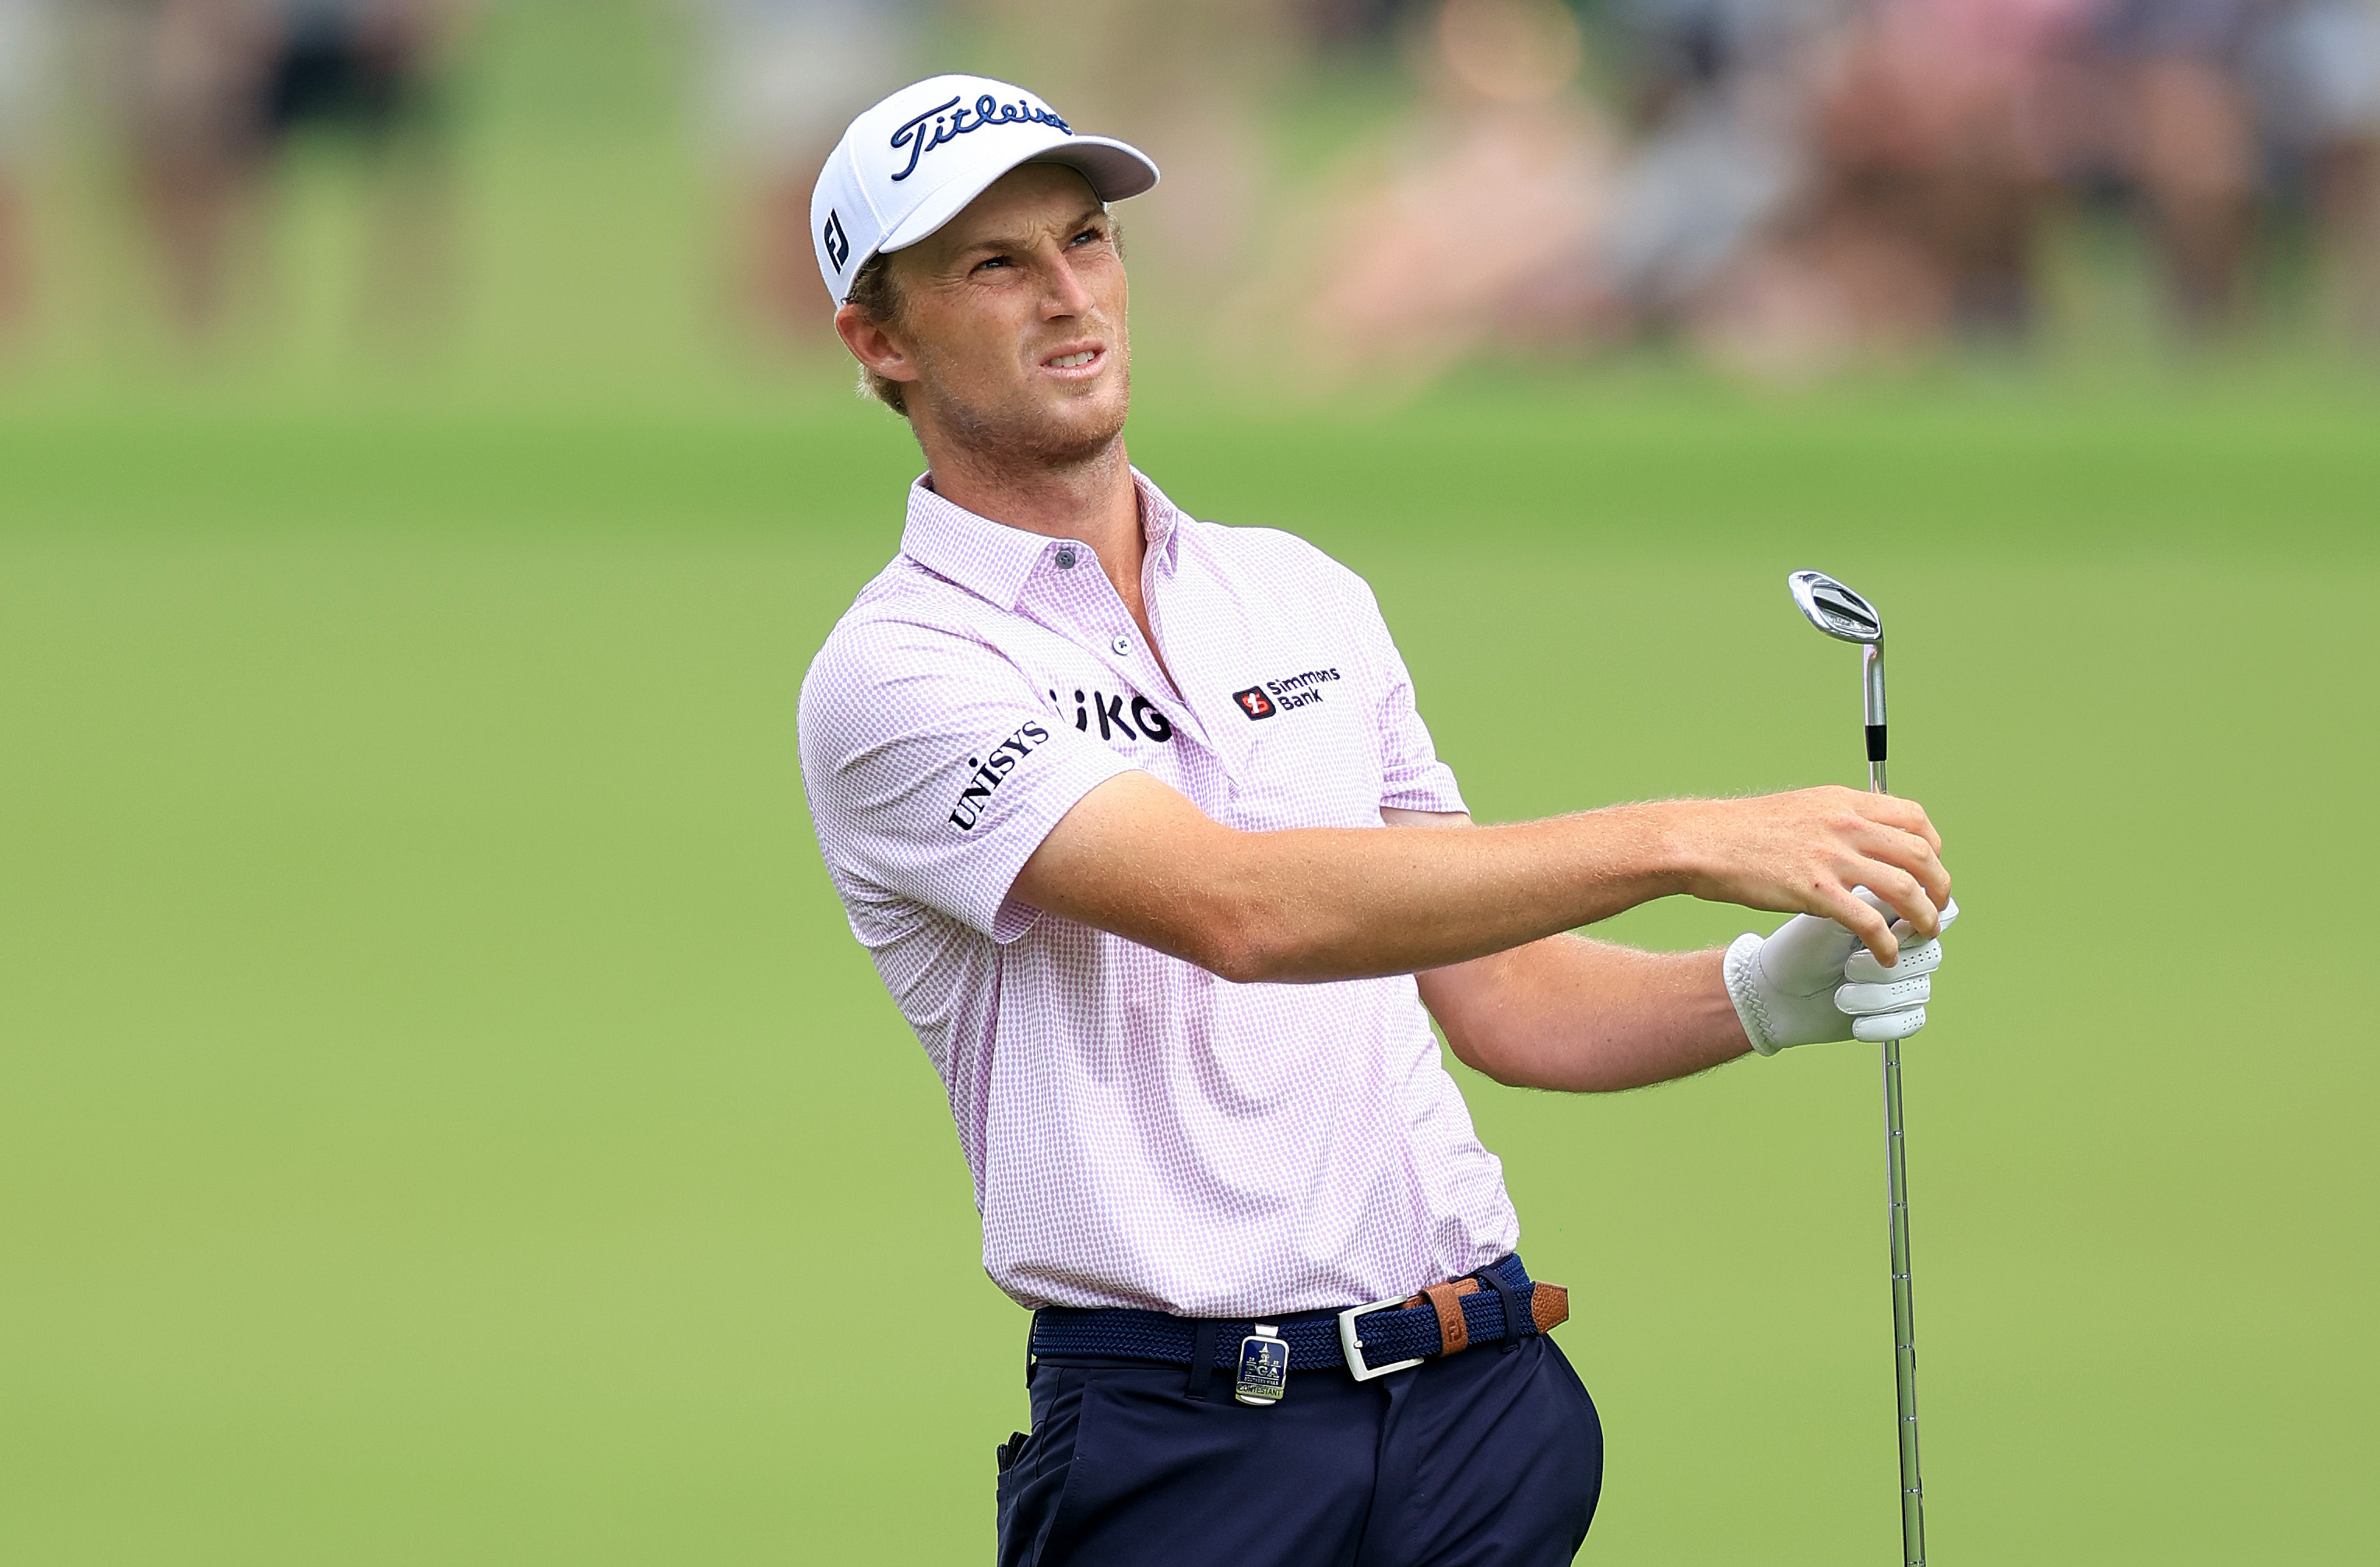 PGA Championship 2022: Will Zalatoris is leading because of a shocking rise  in this one statistic | Golf News and Tour Information | GolfDigest.com